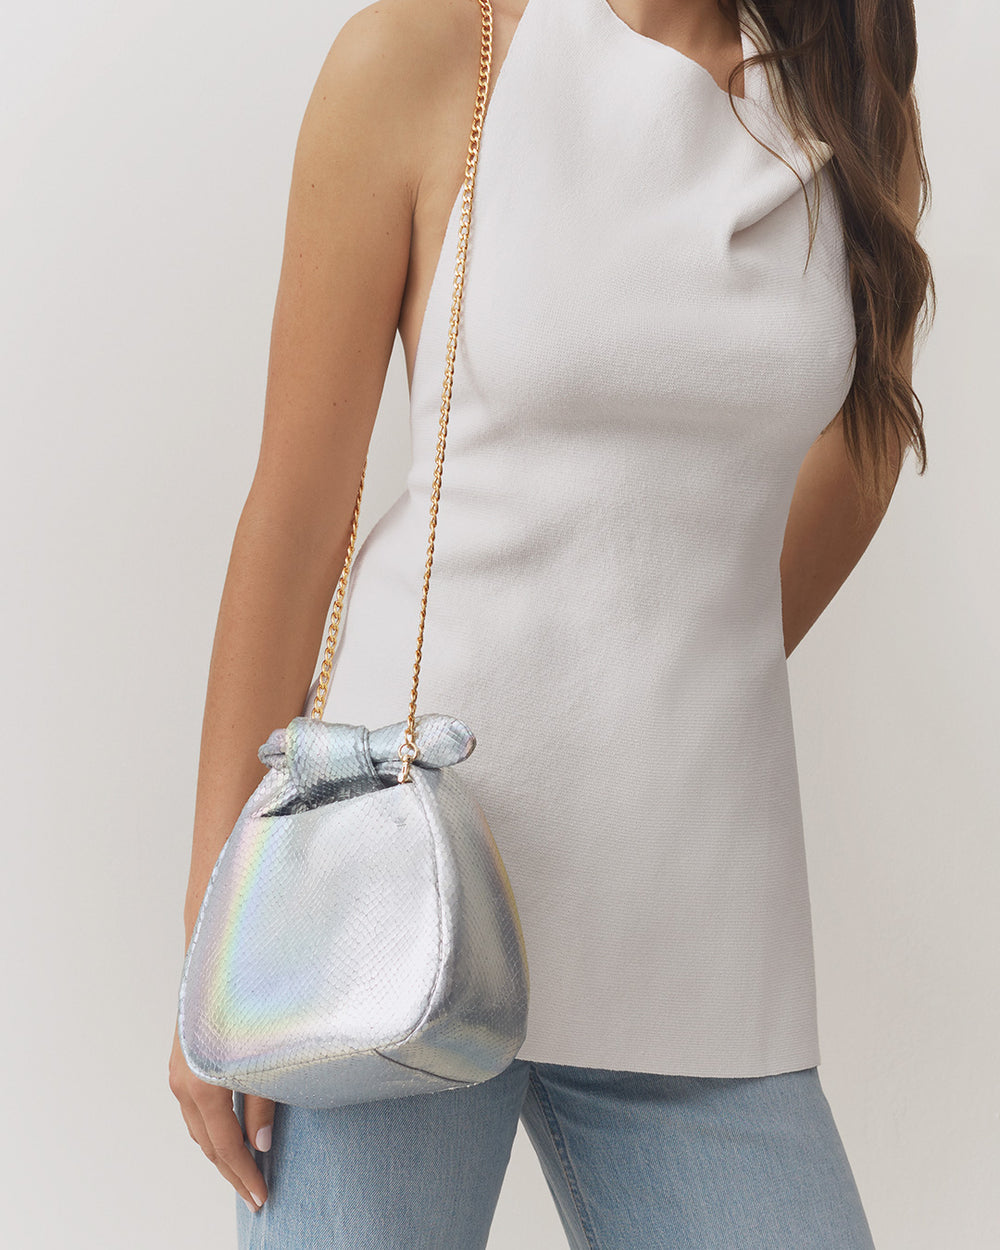 Person wearing a sleeveless top, jeans, and carrying a snake-embossed leather bag with a chain strap.